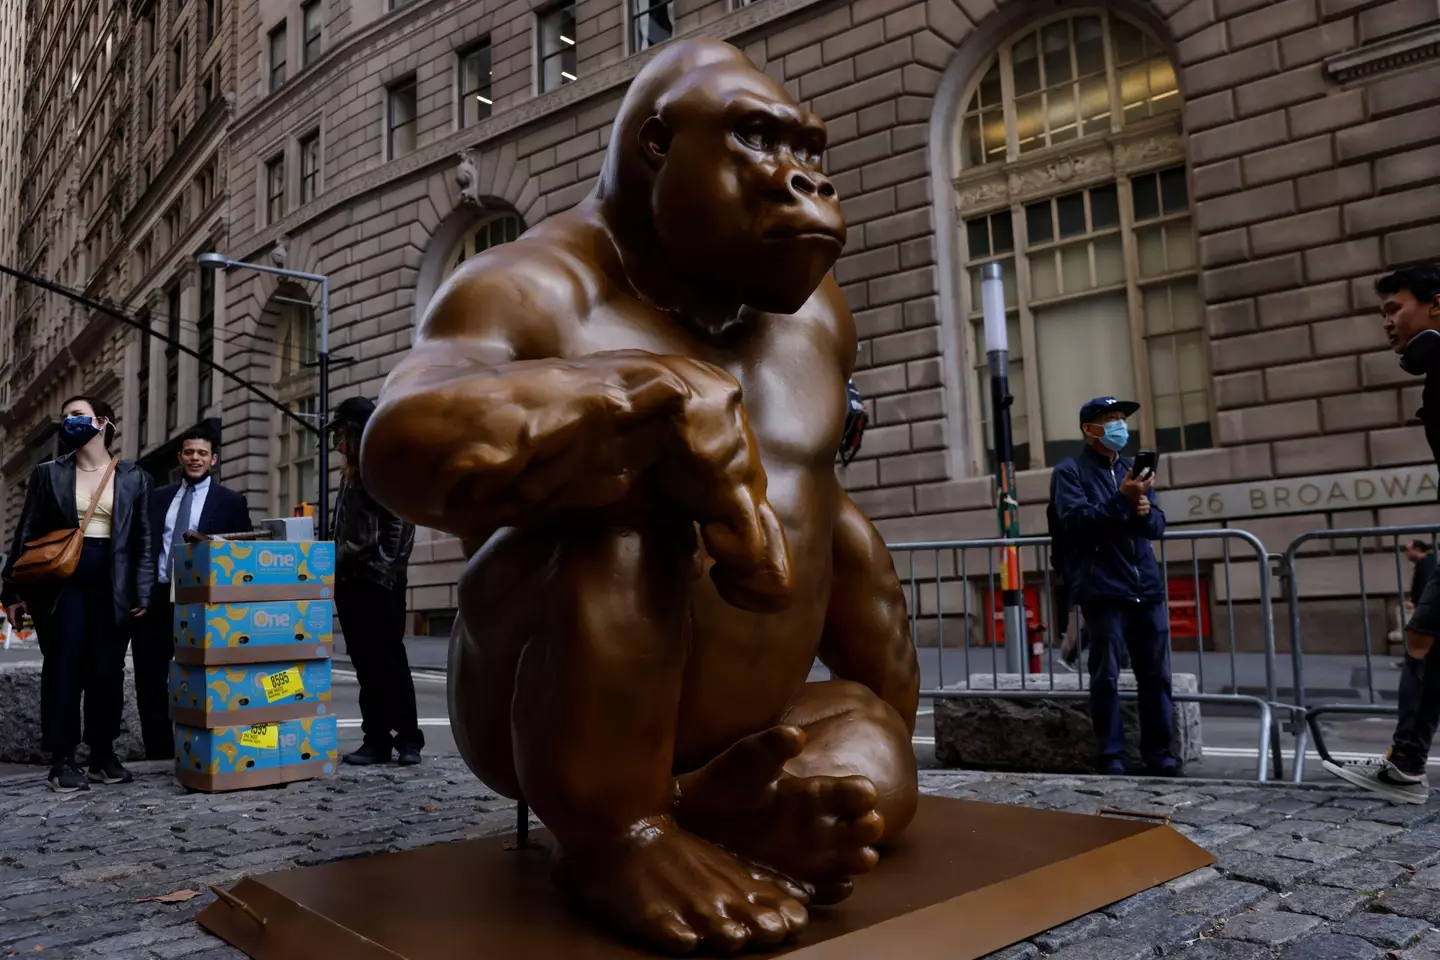 Harambe lives on in our memories, and this giant gold statue.